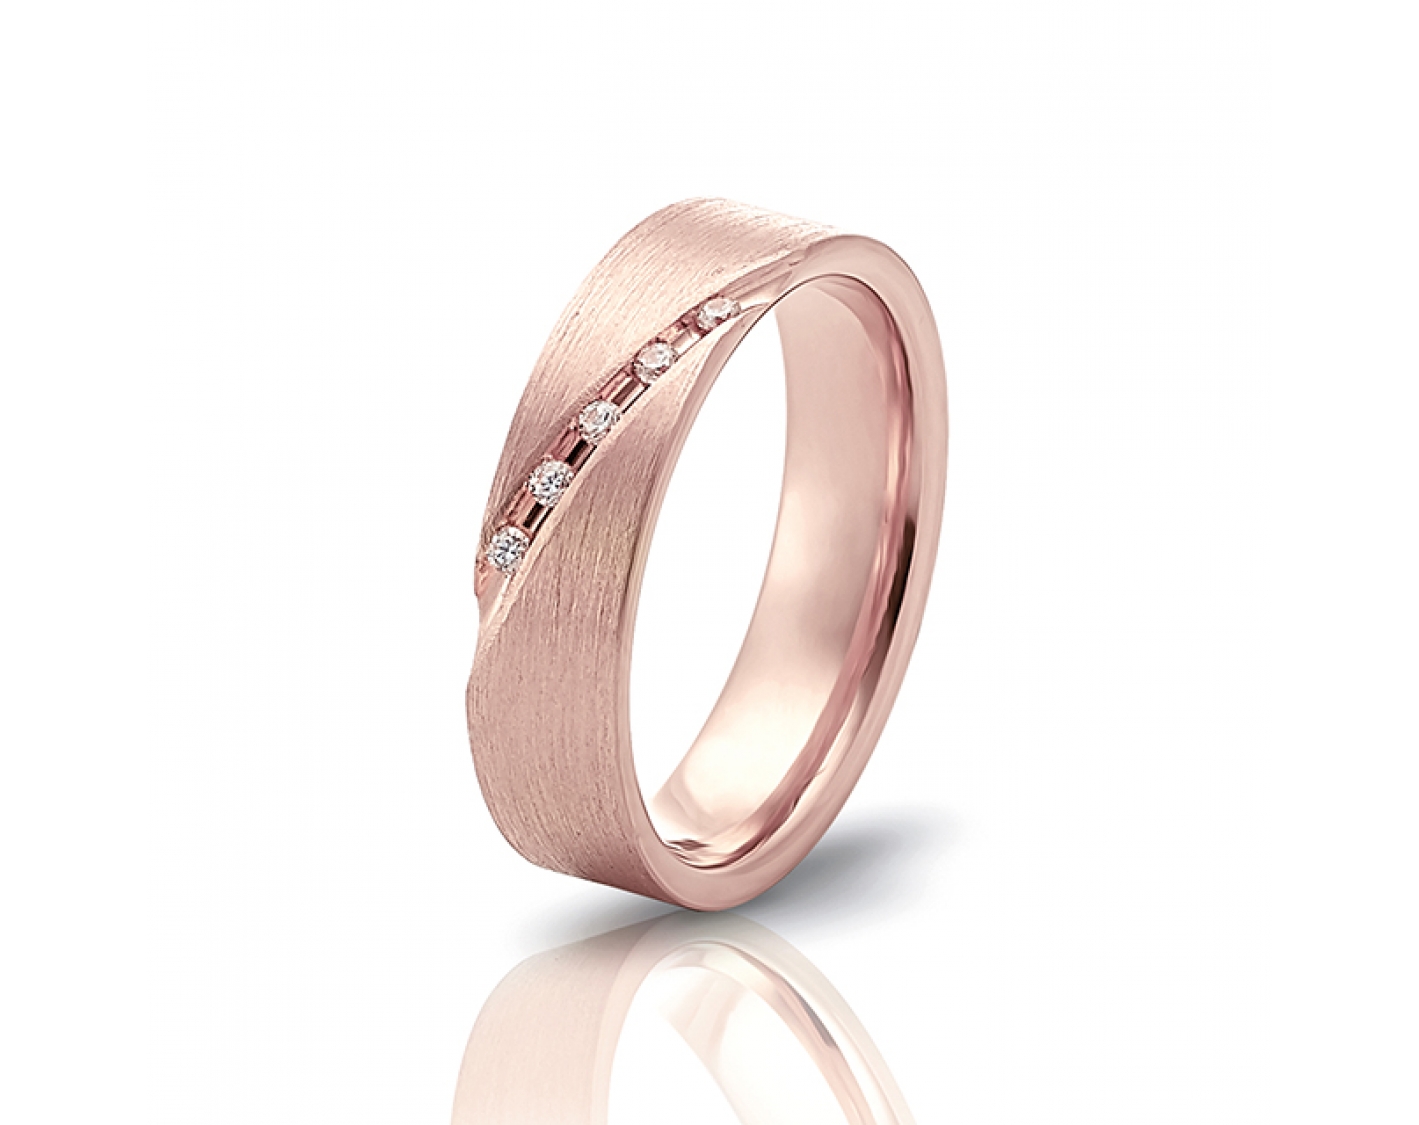 18k rose gold 5mm matte wedding band with diagonal line and diamonds Photos & images